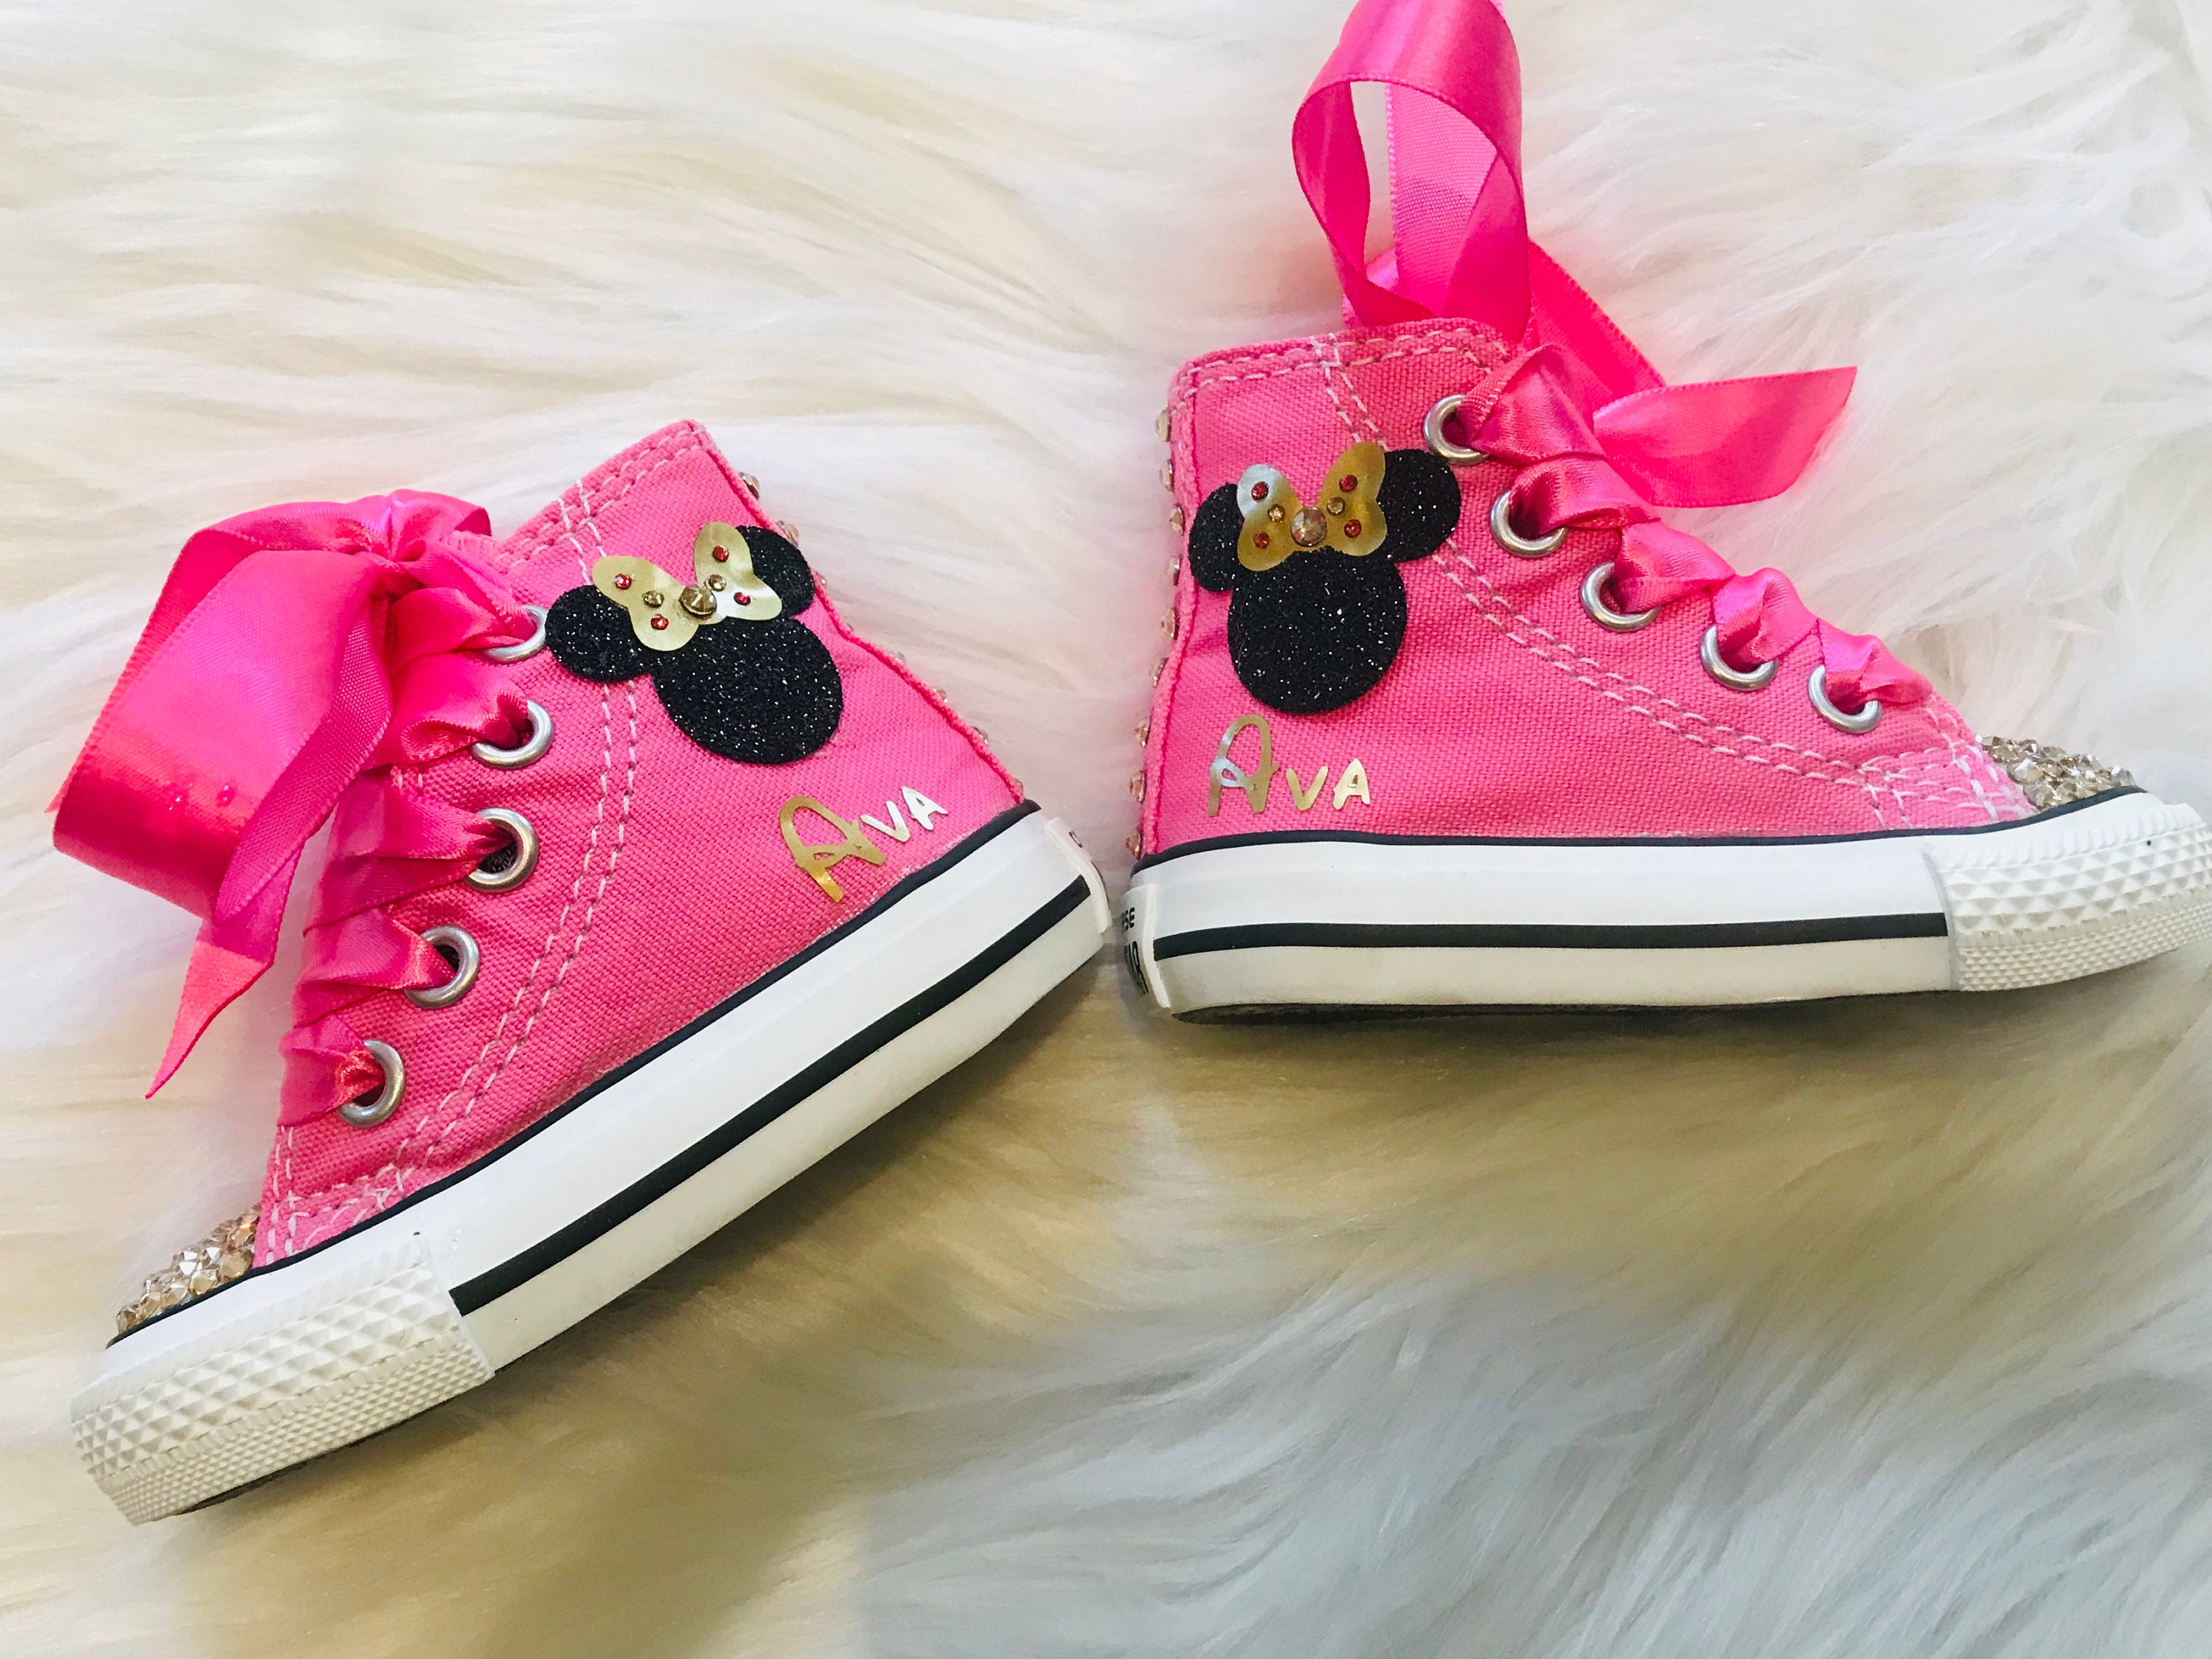 if you choose Pink Minnie Mouse Disney Inspired Crystalized High-top Converse Customized with Name & Swarovski Crystals Schoenen Meisjesschoenen Sneakers & Sportschoenen 